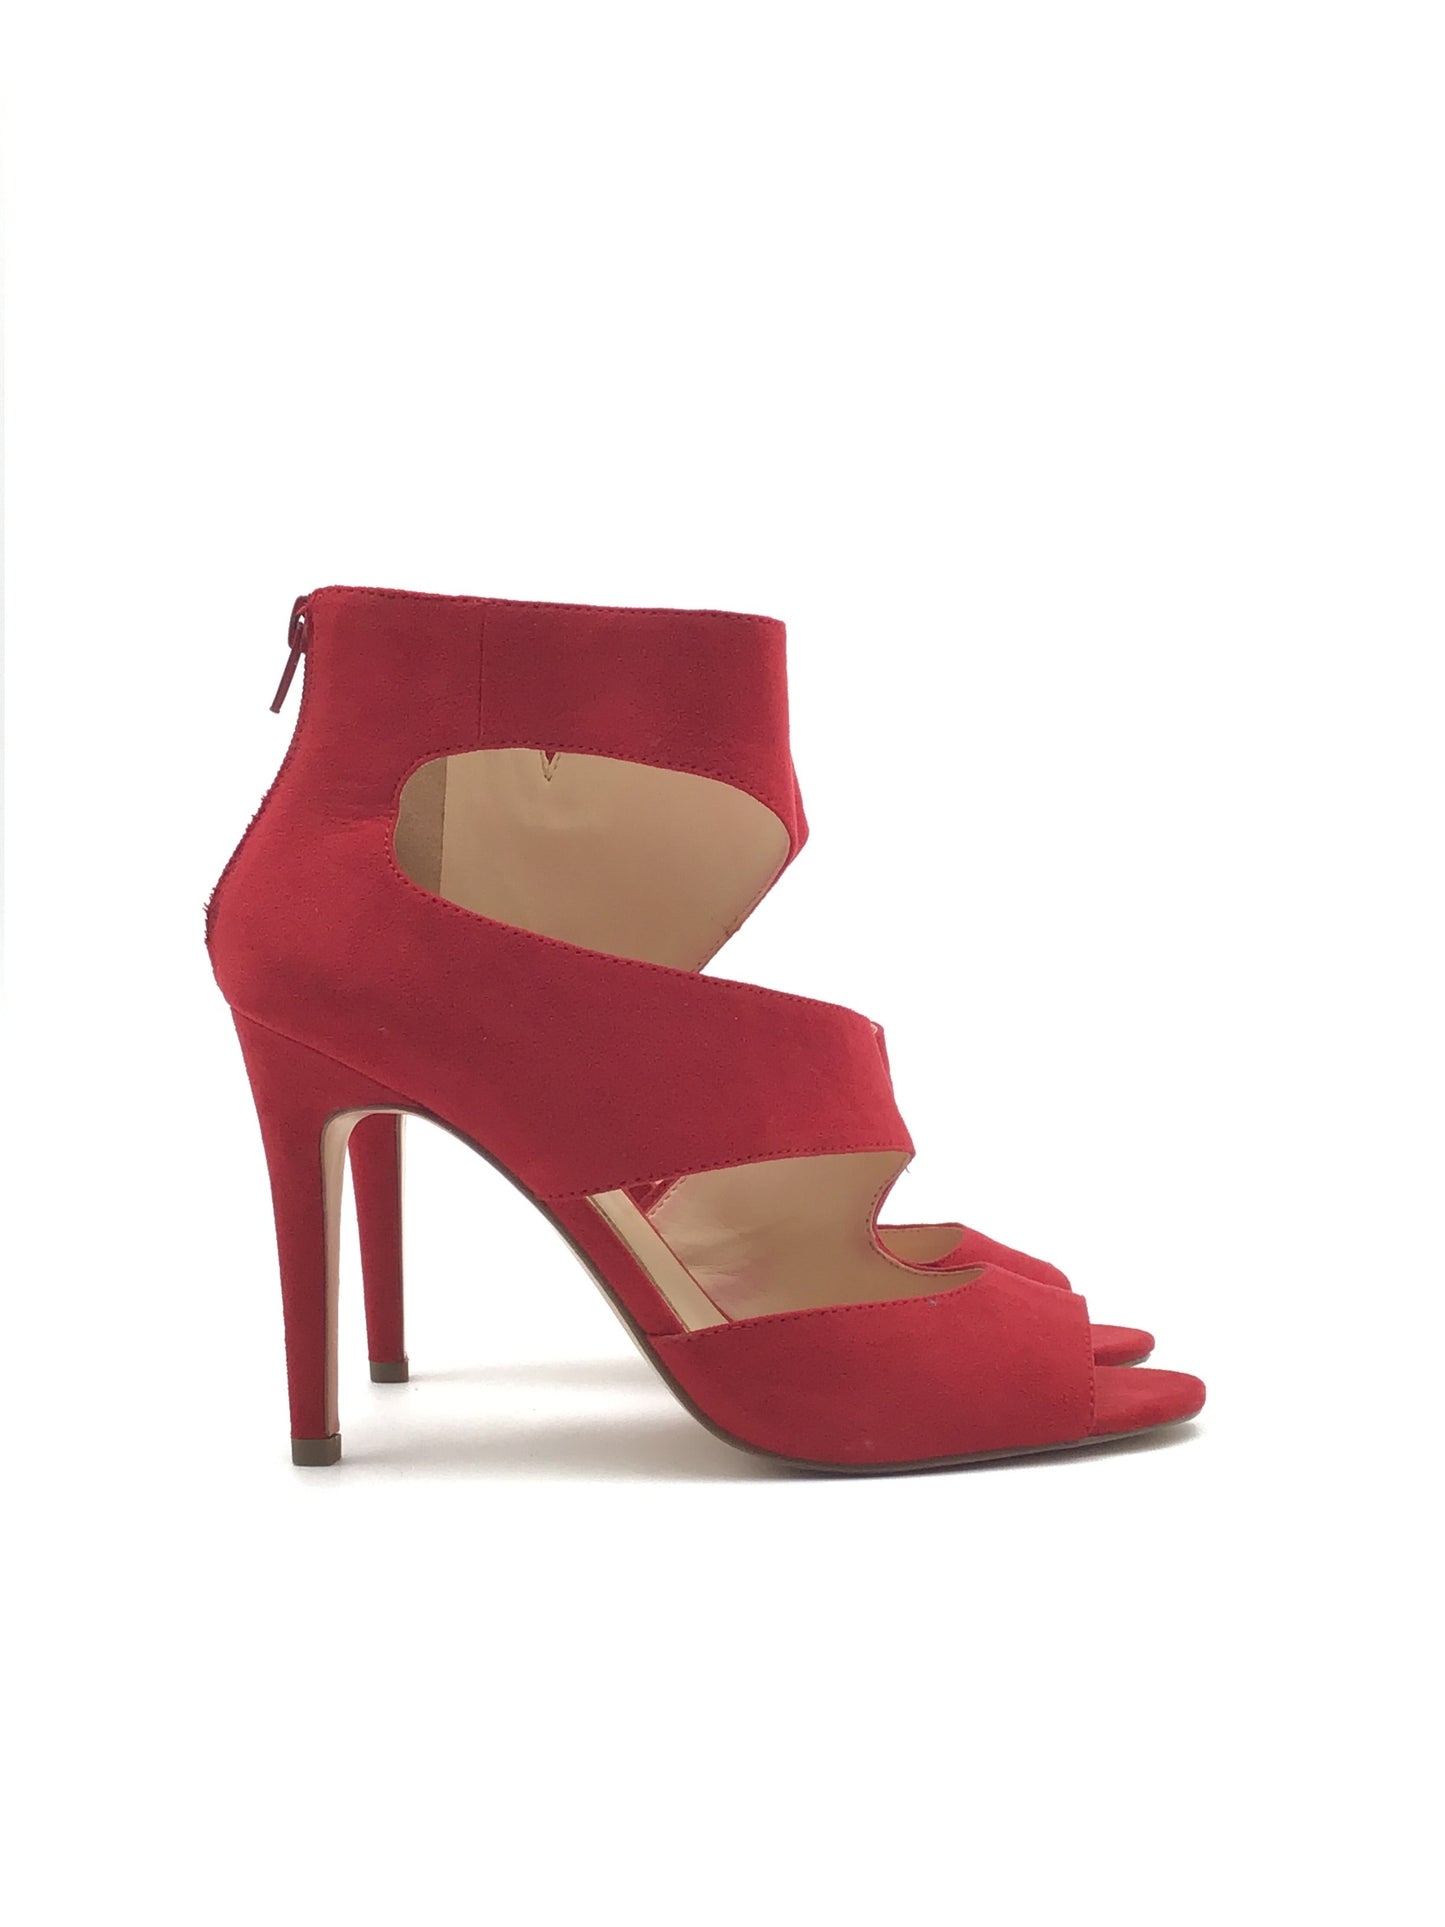 Red Shoes Heels Stiletto Jessica Simpson, Size 9